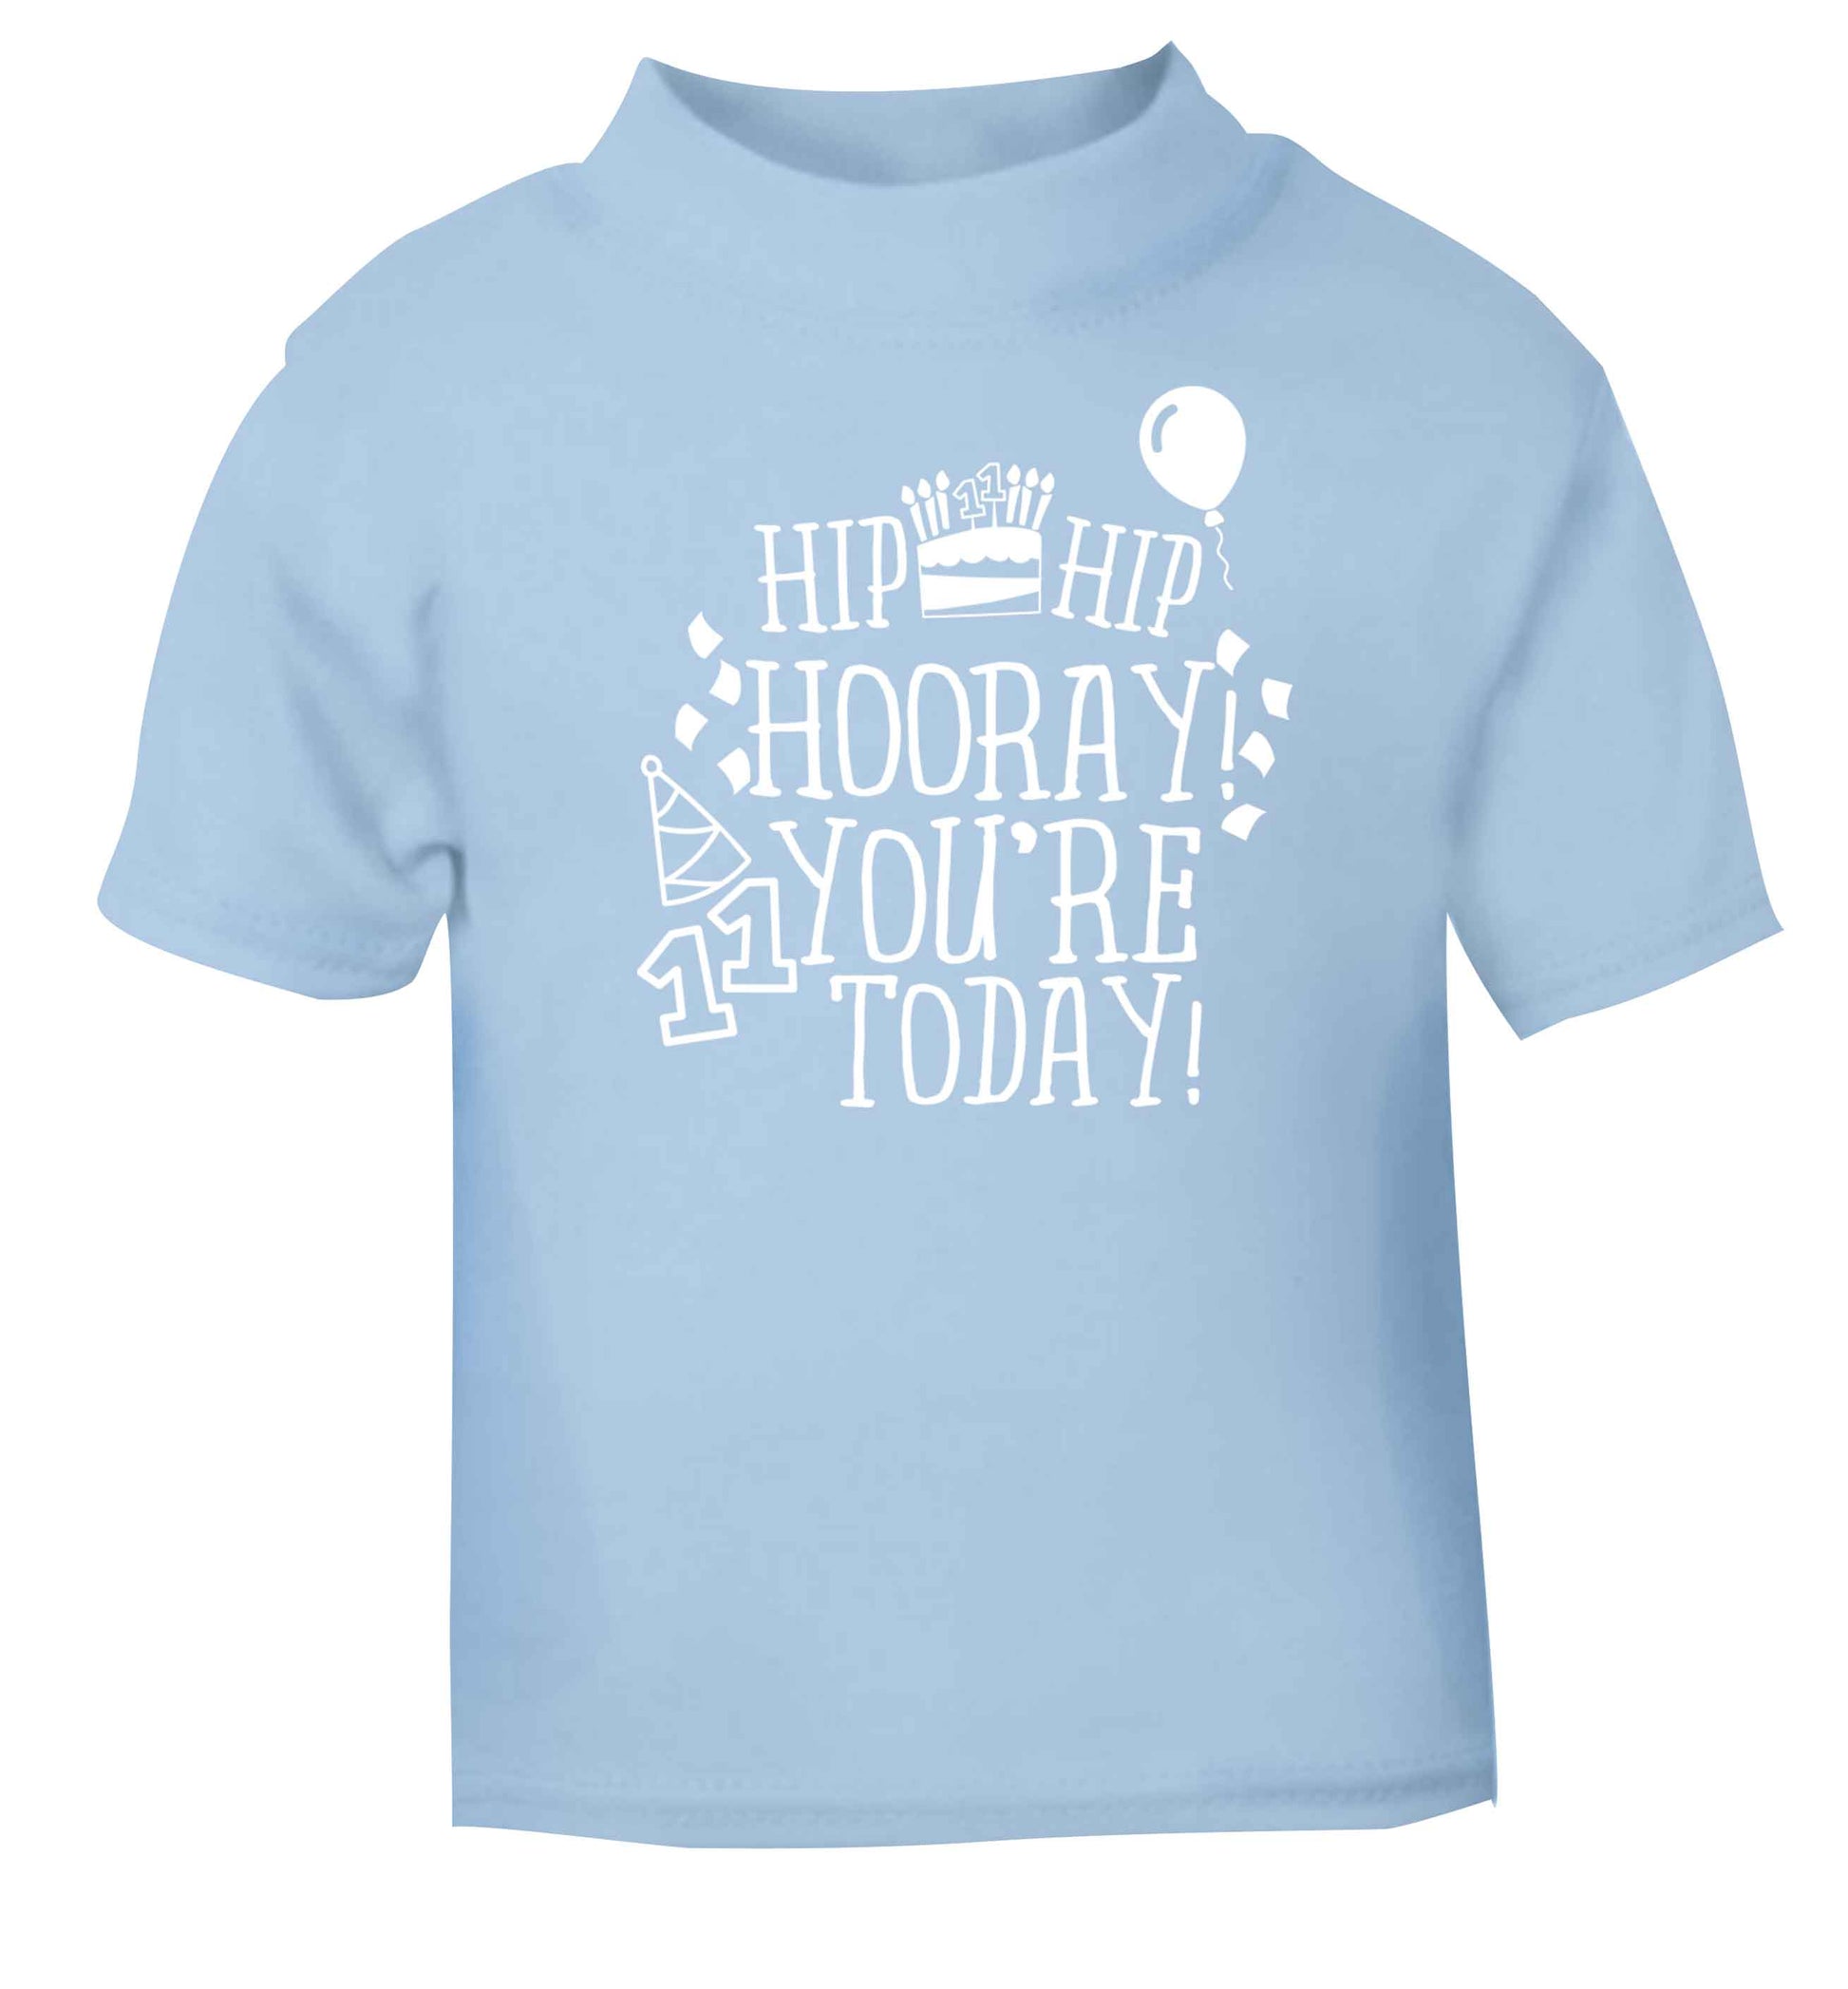 Hip hip hooray I you're eleven today! light blue baby toddler Tshirt 2 Years